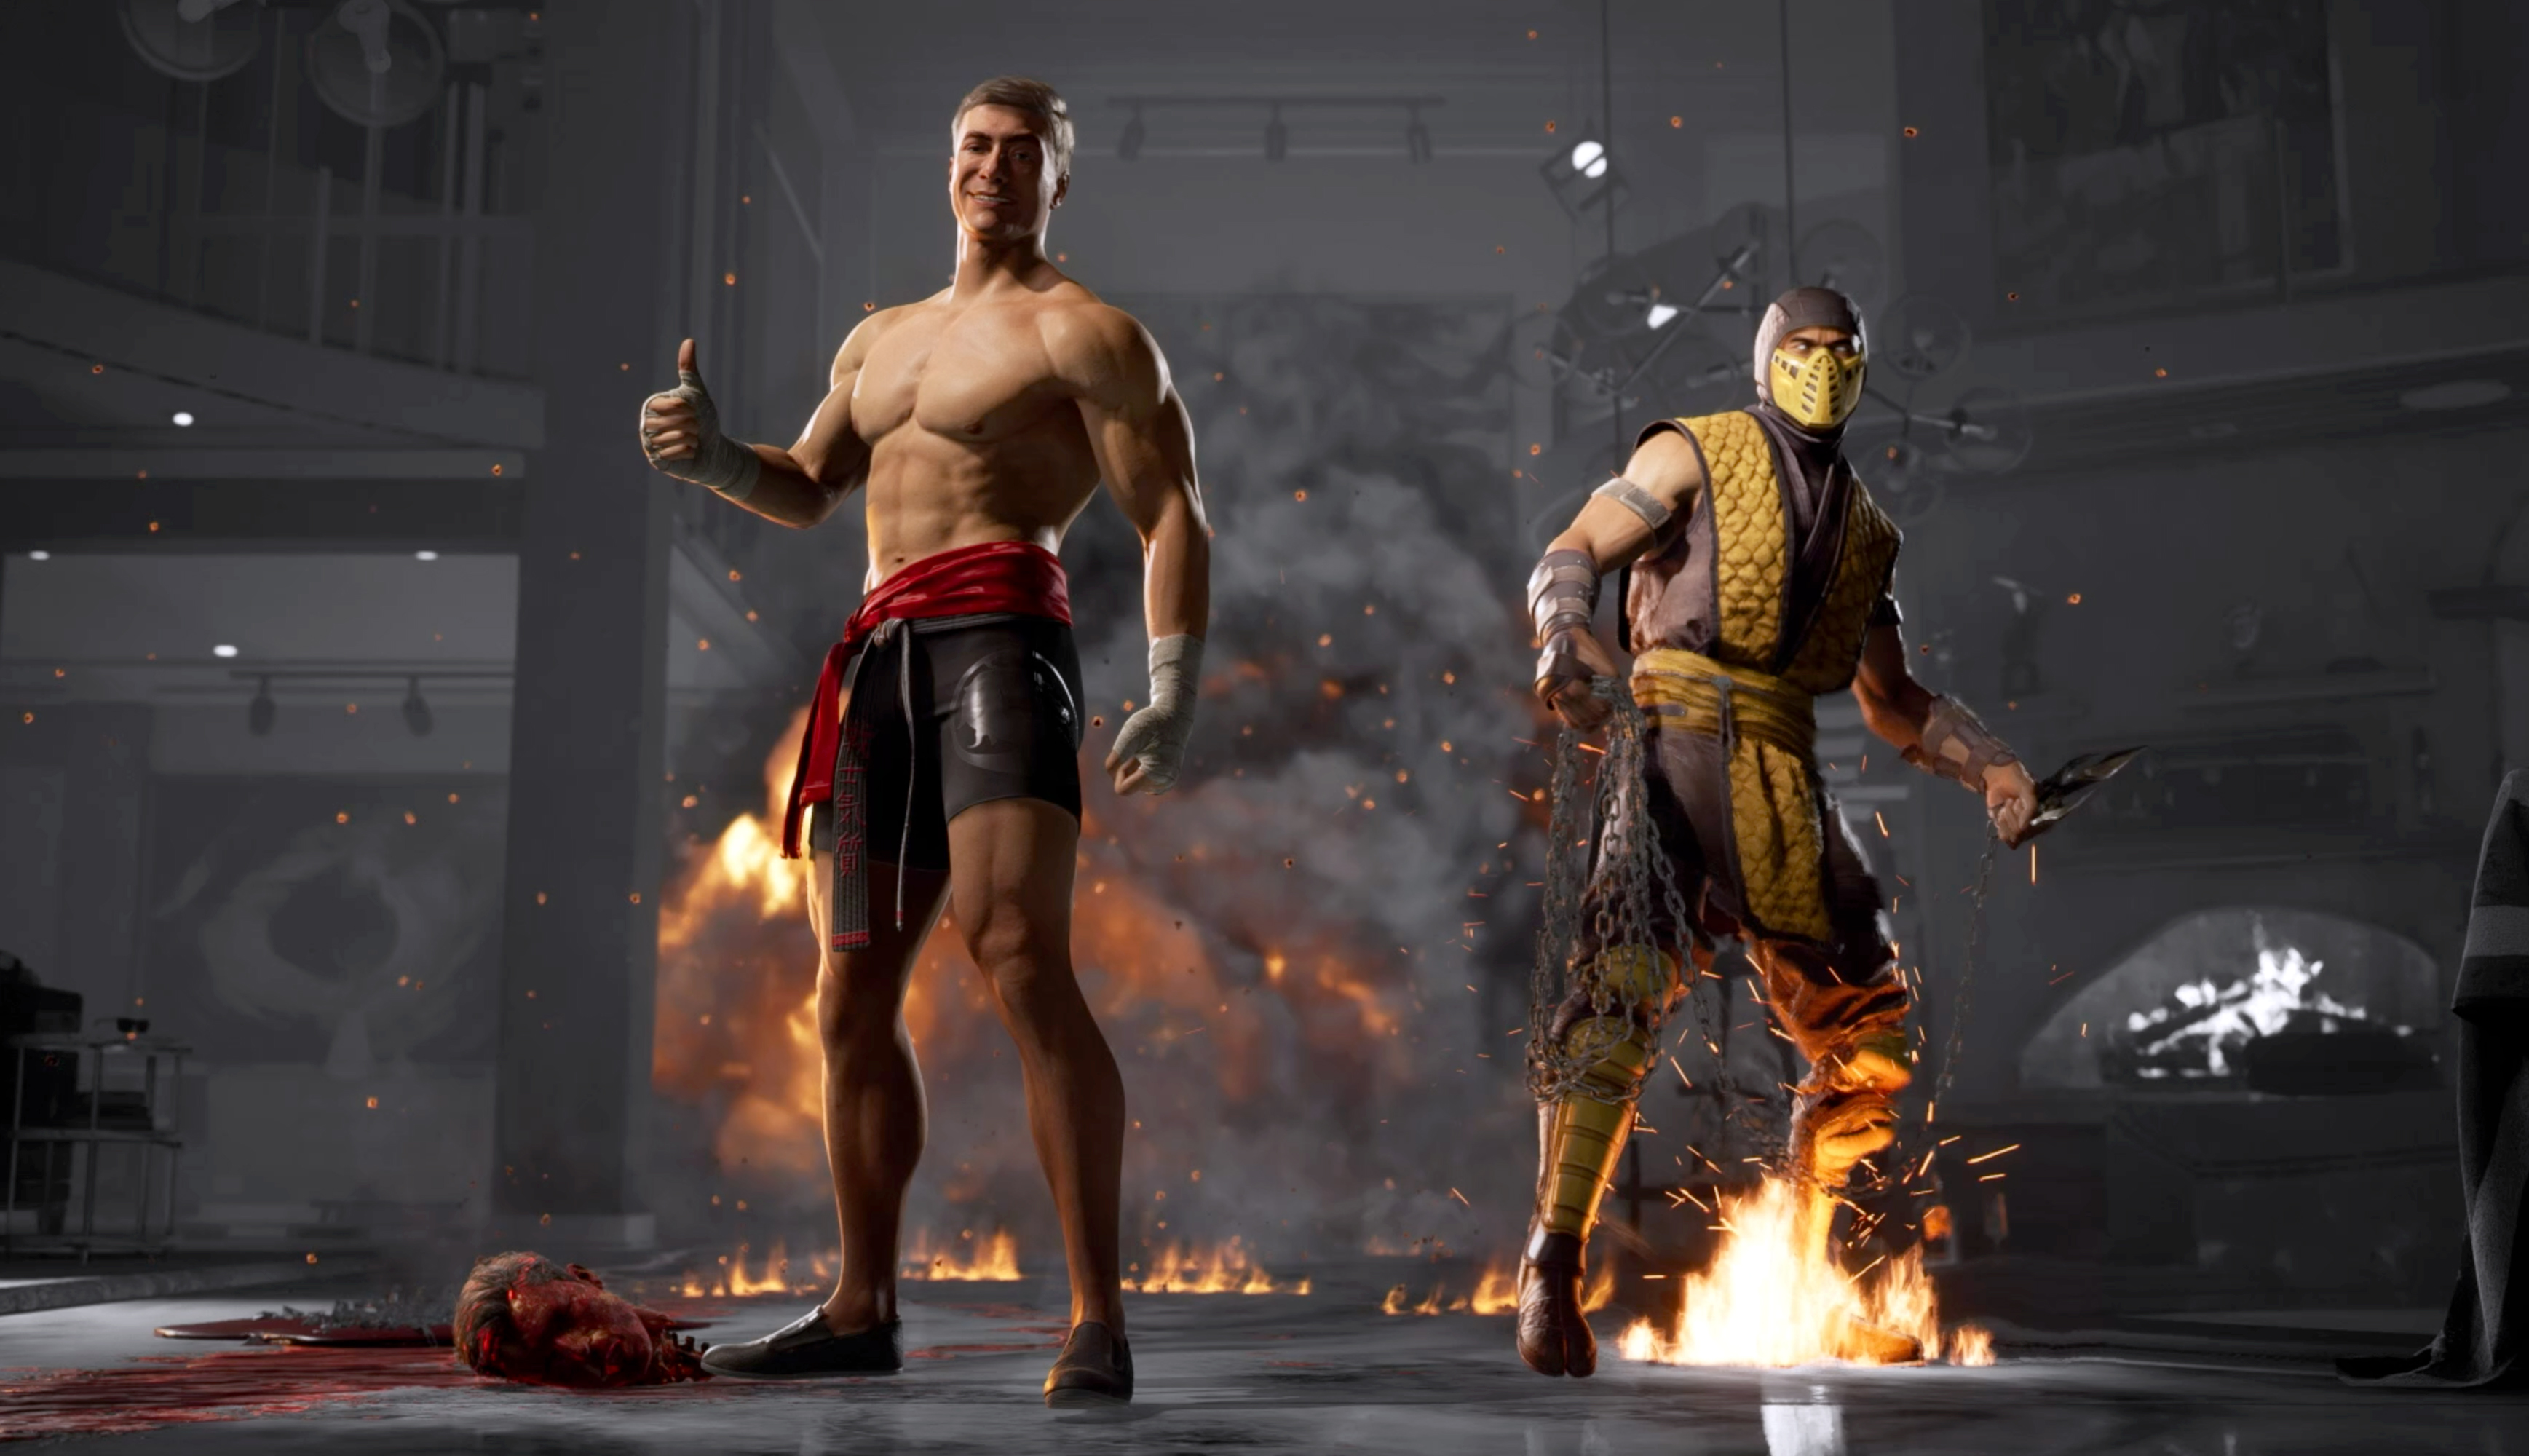 Here’s our first look at Jean-Claude Van Damme as Johnny Cage in MK1 ...